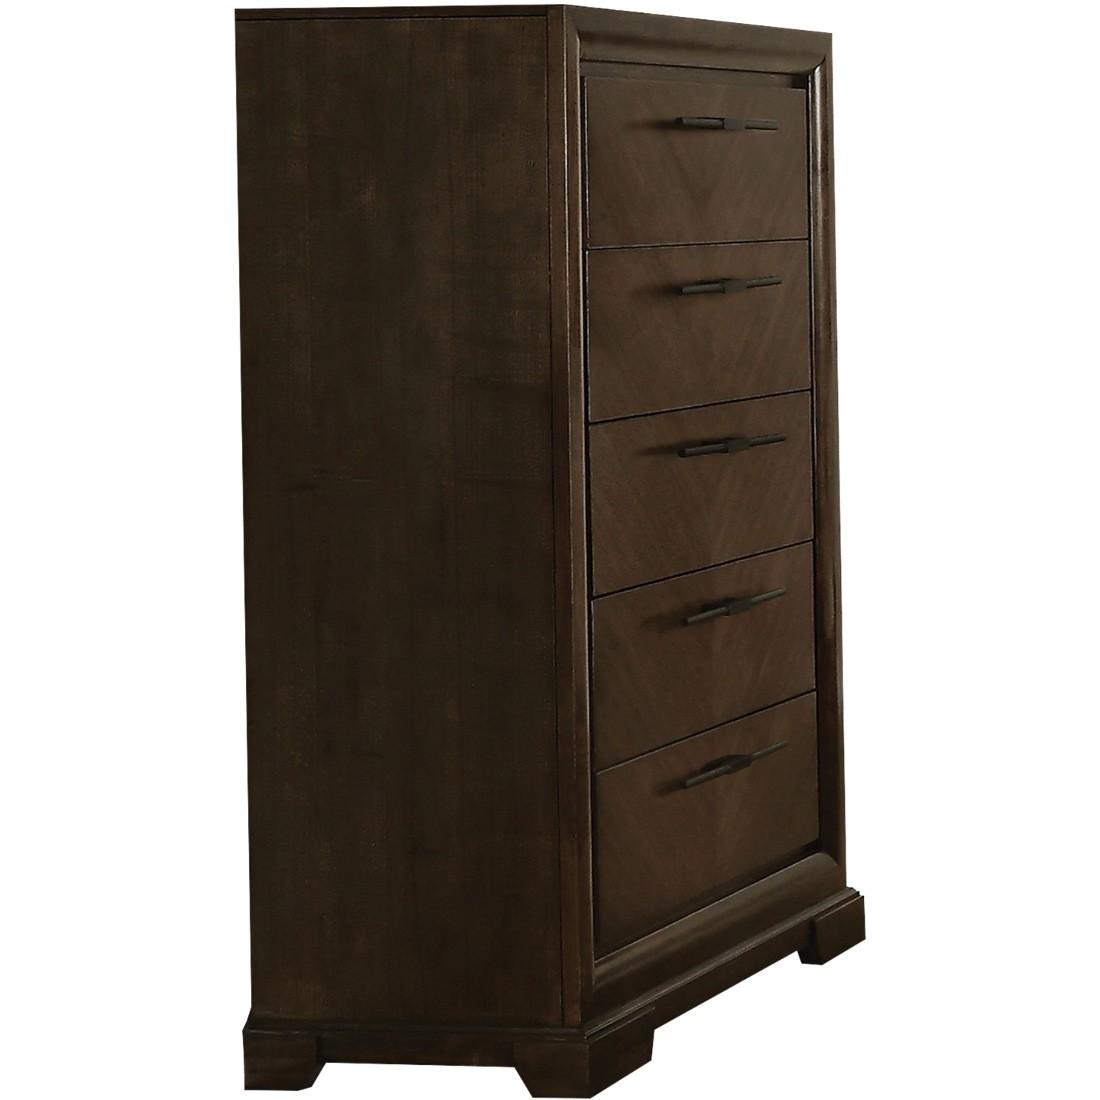 Classic, Traditional Bachelor Chest Selma Selma-24096 in Tobacco 